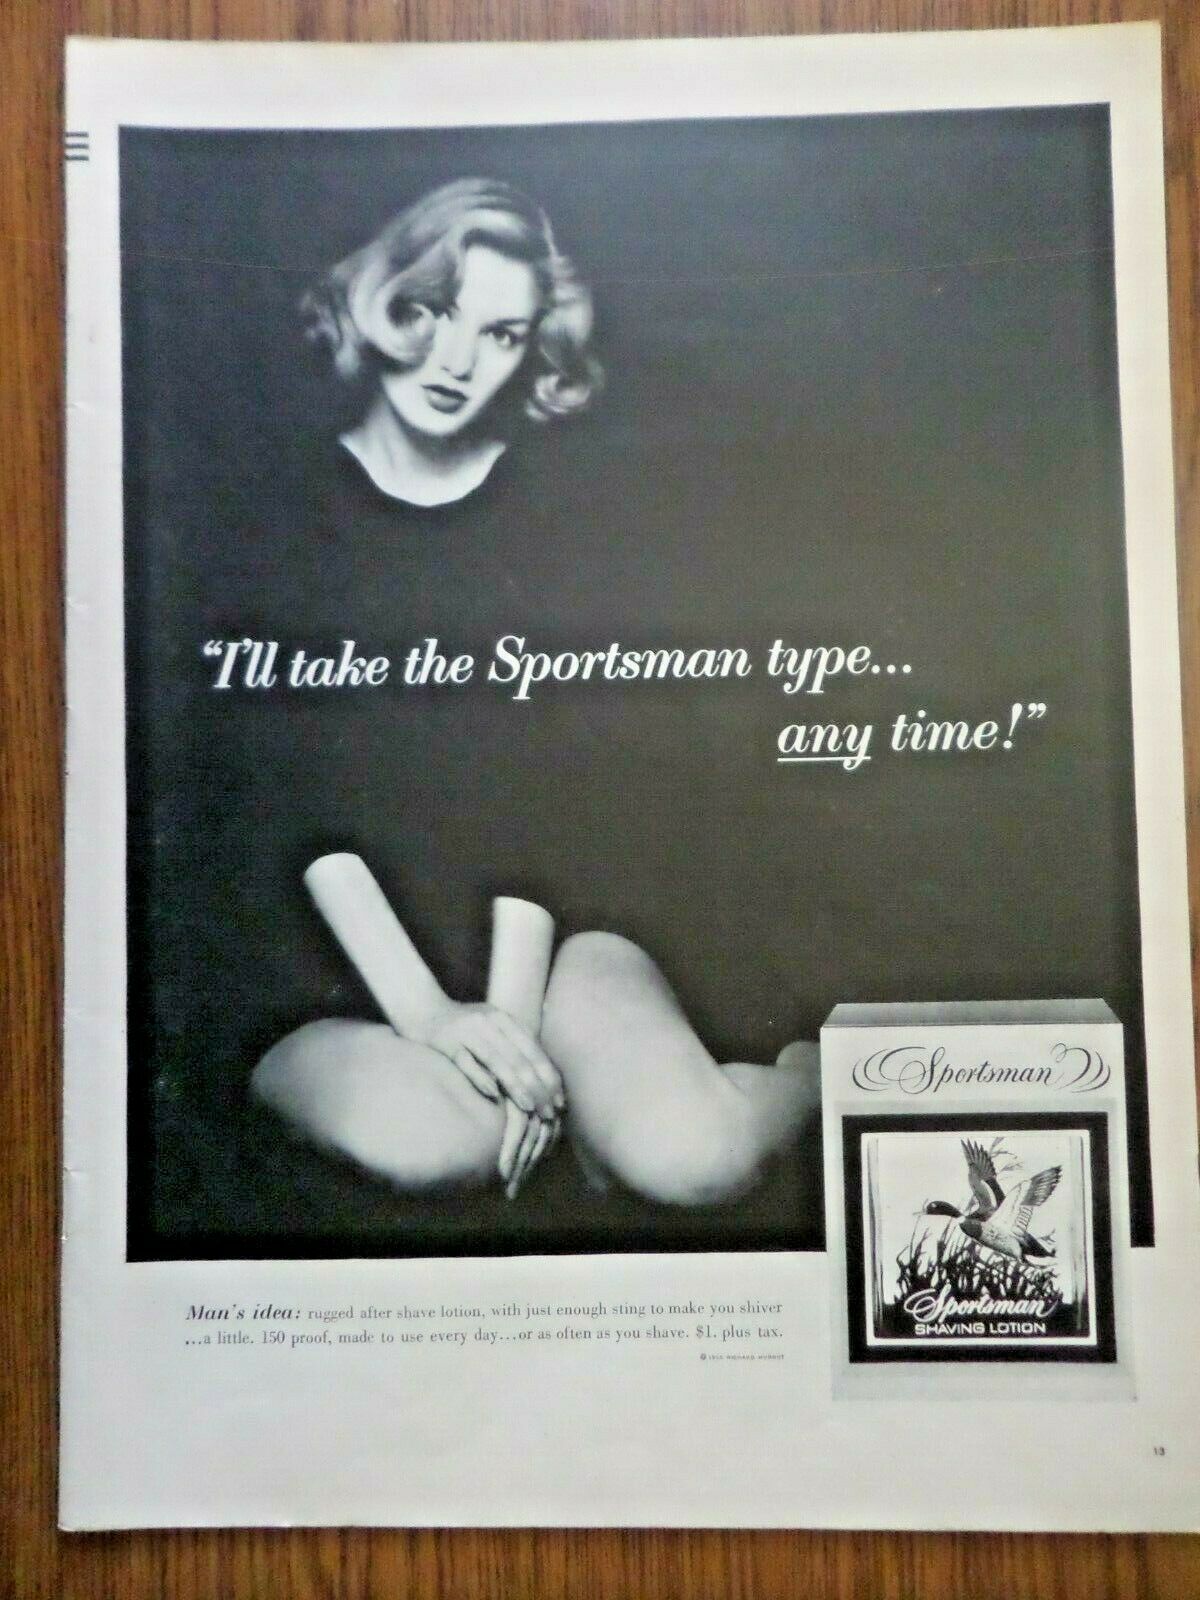 1956 Sportsman Shaving Lotion Ad  I'll Take The Sportsman Type Any Time